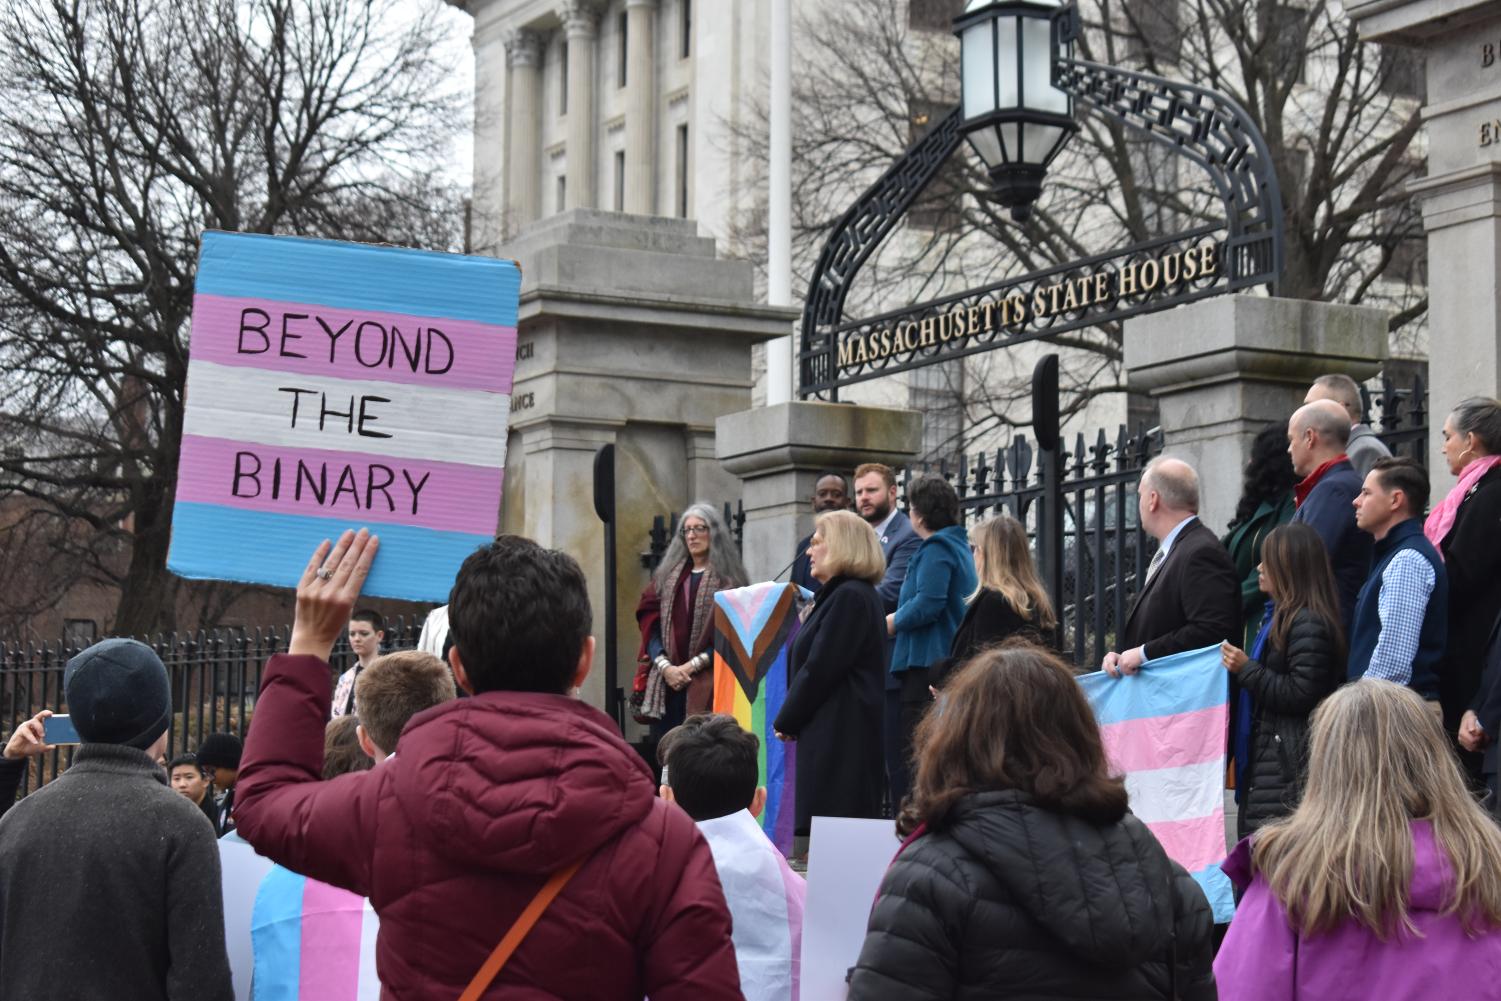 Lens%3A+Trans+Day+of+Visibility+brings+its+Boston+community+members+out+in+demonstration+and+solidarity